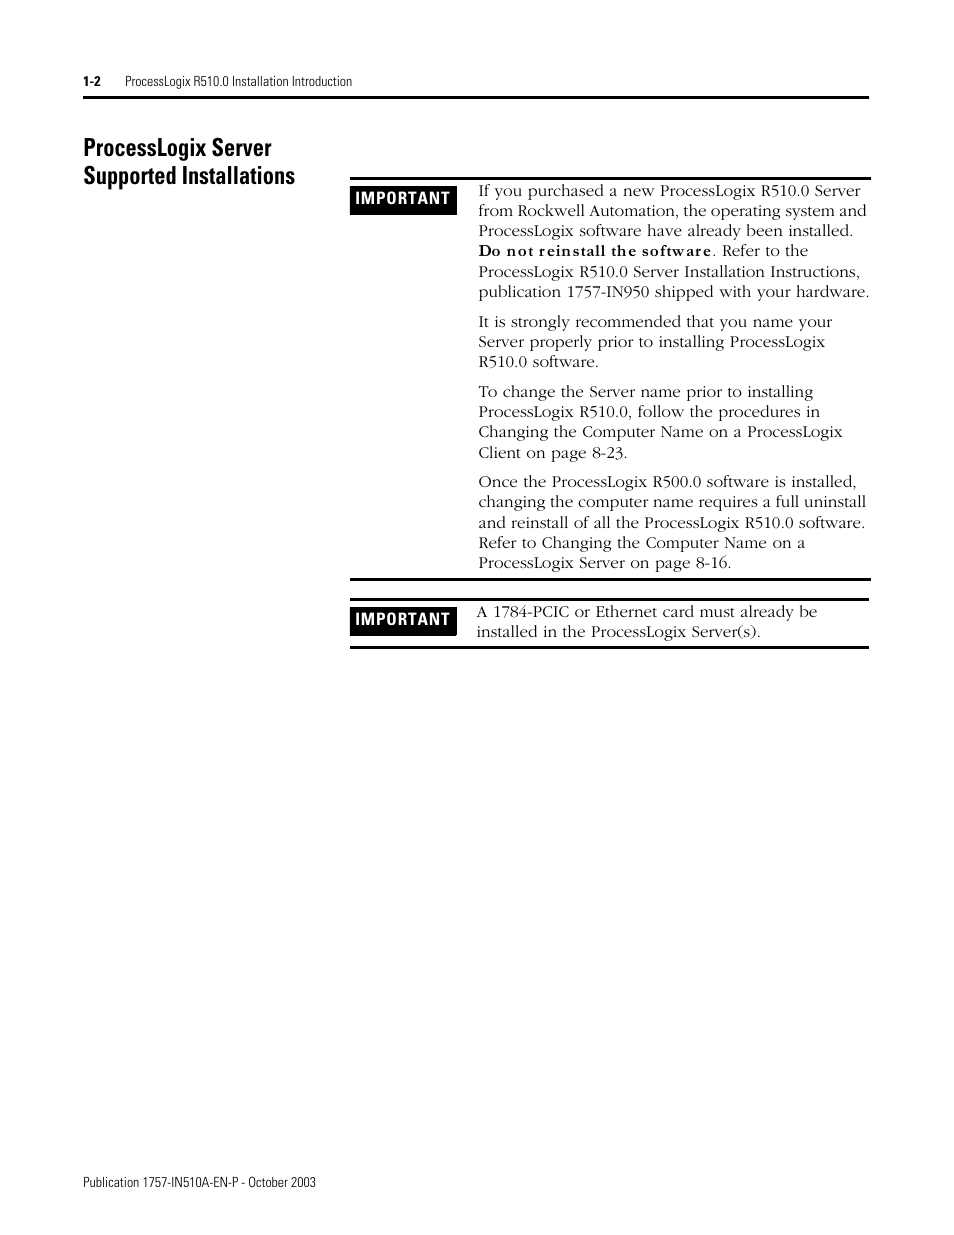 Processlogix server supported installations, Processlogix server supported installations -2 | Rockwell Automation 1757-SWKIT5100 ProcessLogix R510.0 Installation and Upgrade Guide User Manual | Page 18 / 271